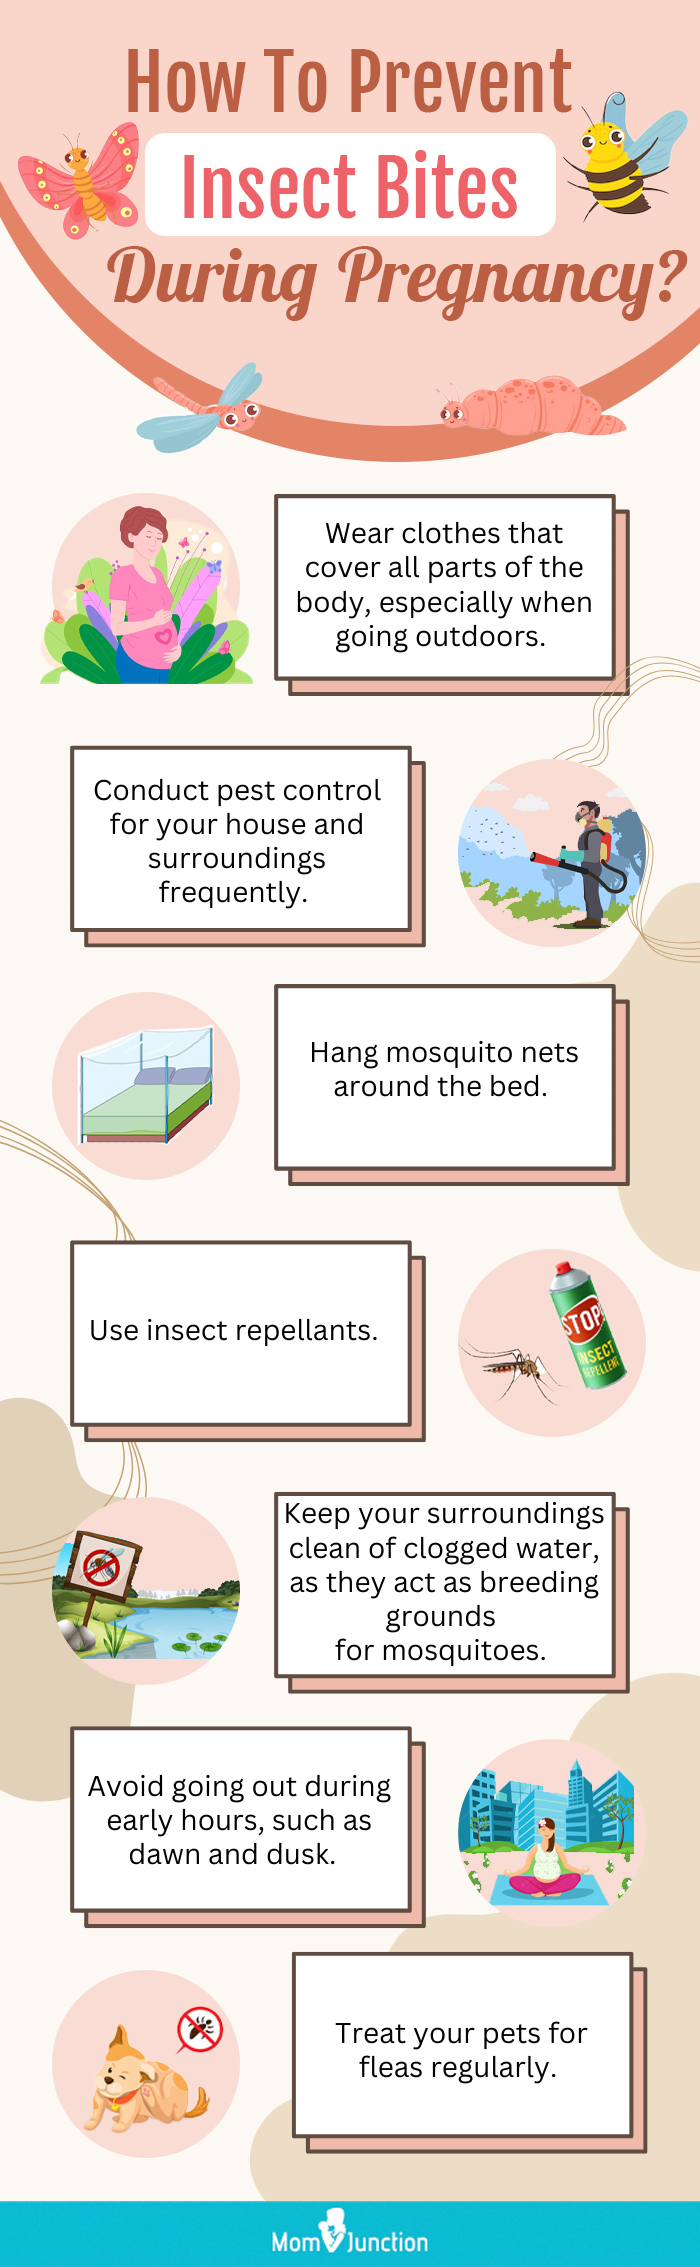 how to prevent insect bites during pregnancy (infographic)